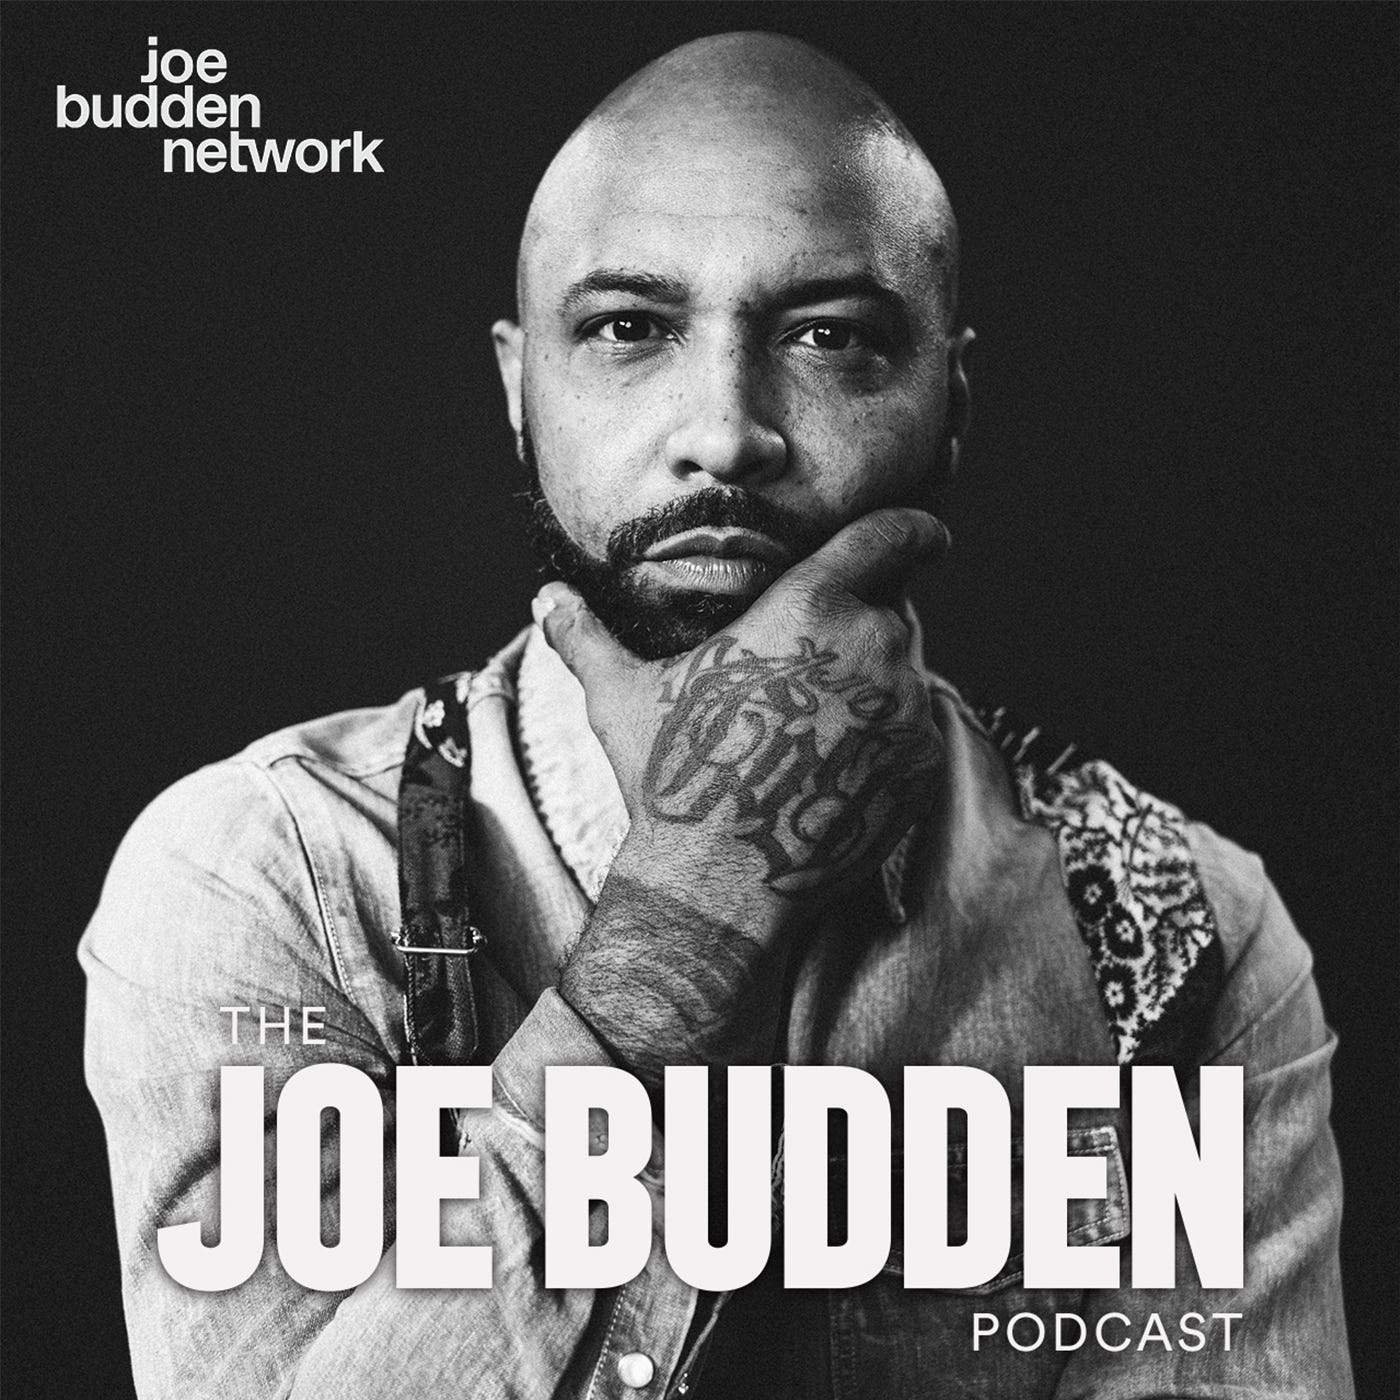 Stream The Joe Budden Podcast music | Listen to songs, albums, playlists  for free on SoundCloud